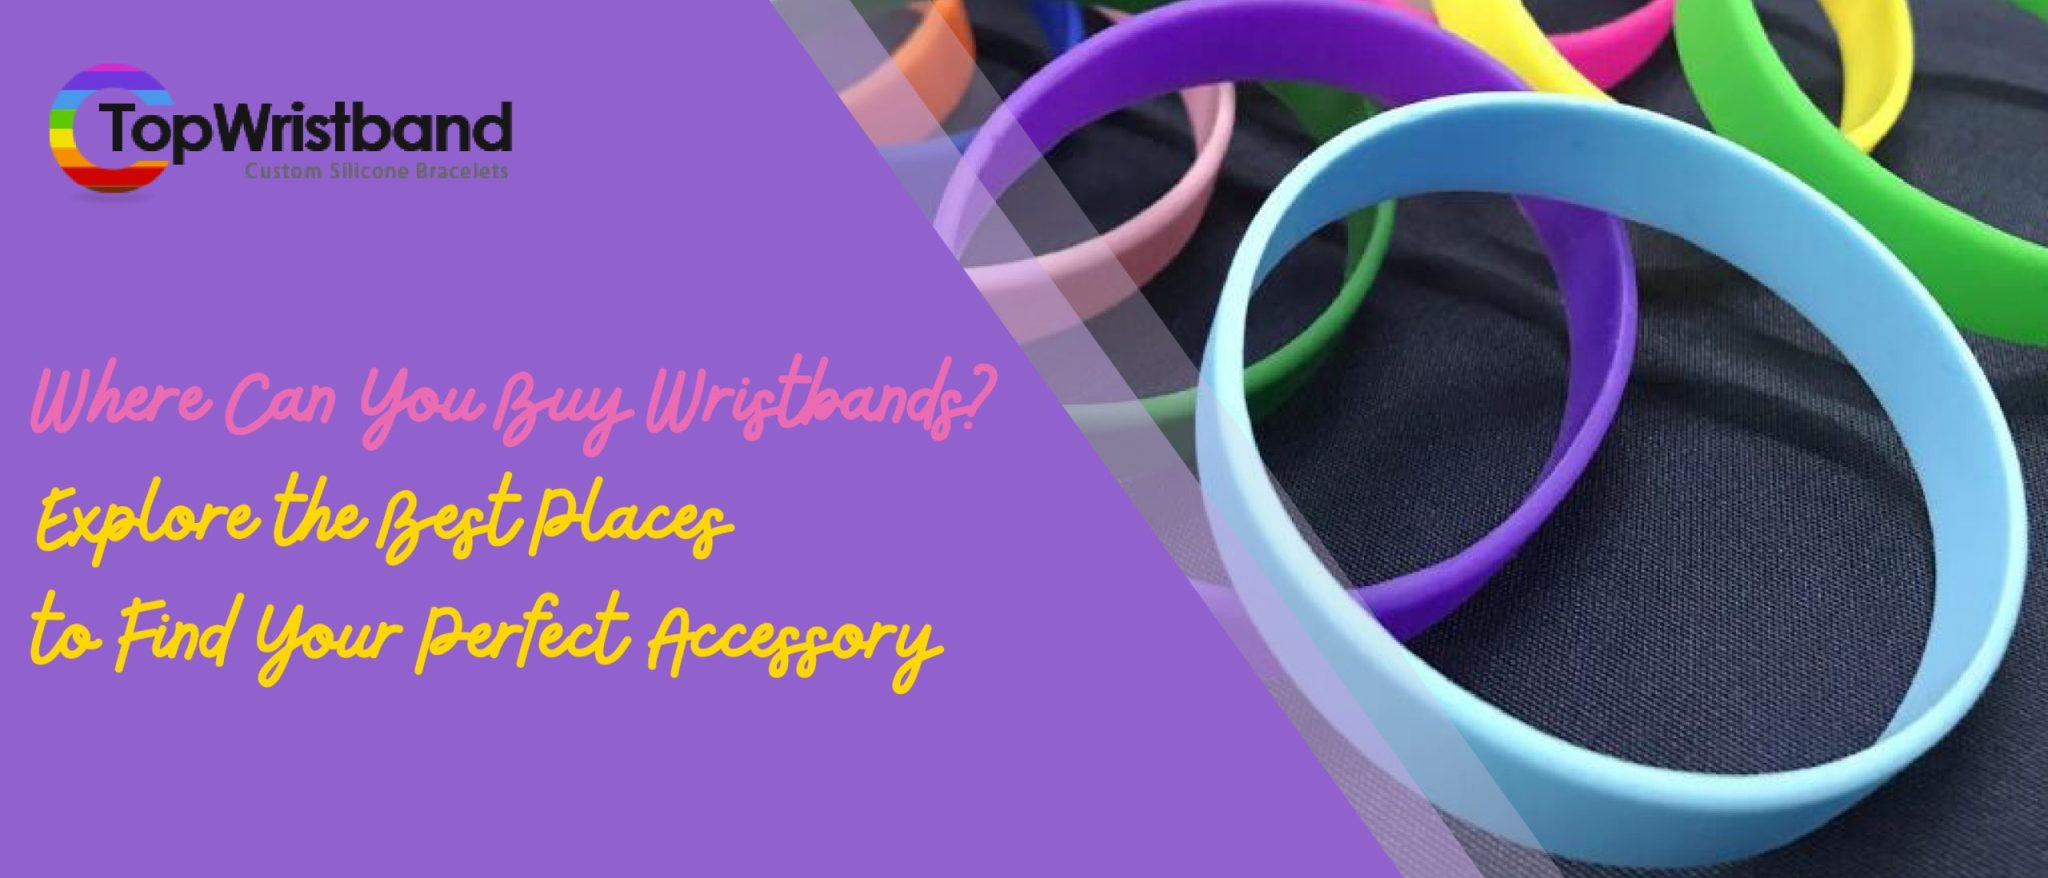 Where Can I Buy Wristbands? 10 Best Places to Explore to Find the Perfect Accessory